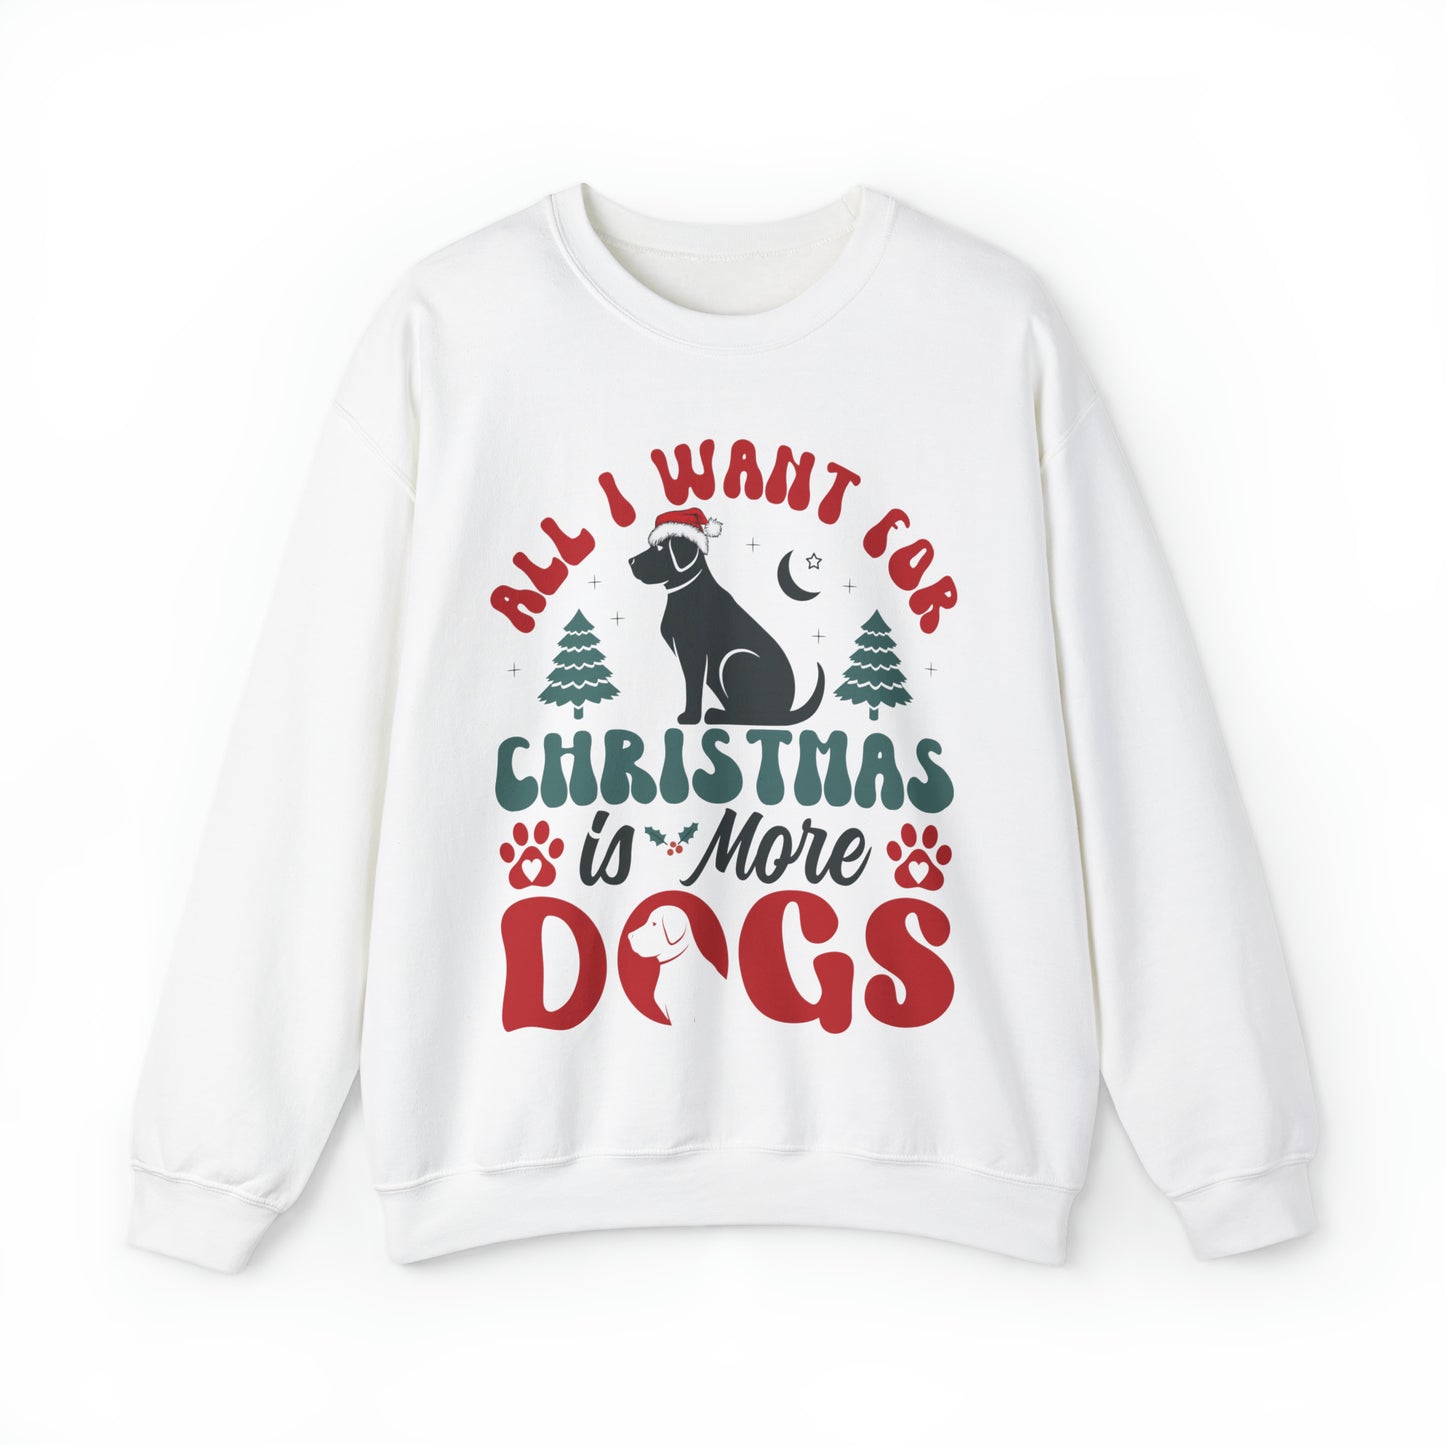 All I Want for Christmas is More Dogs Funny Adult Christmas Unisex Sweatshirt